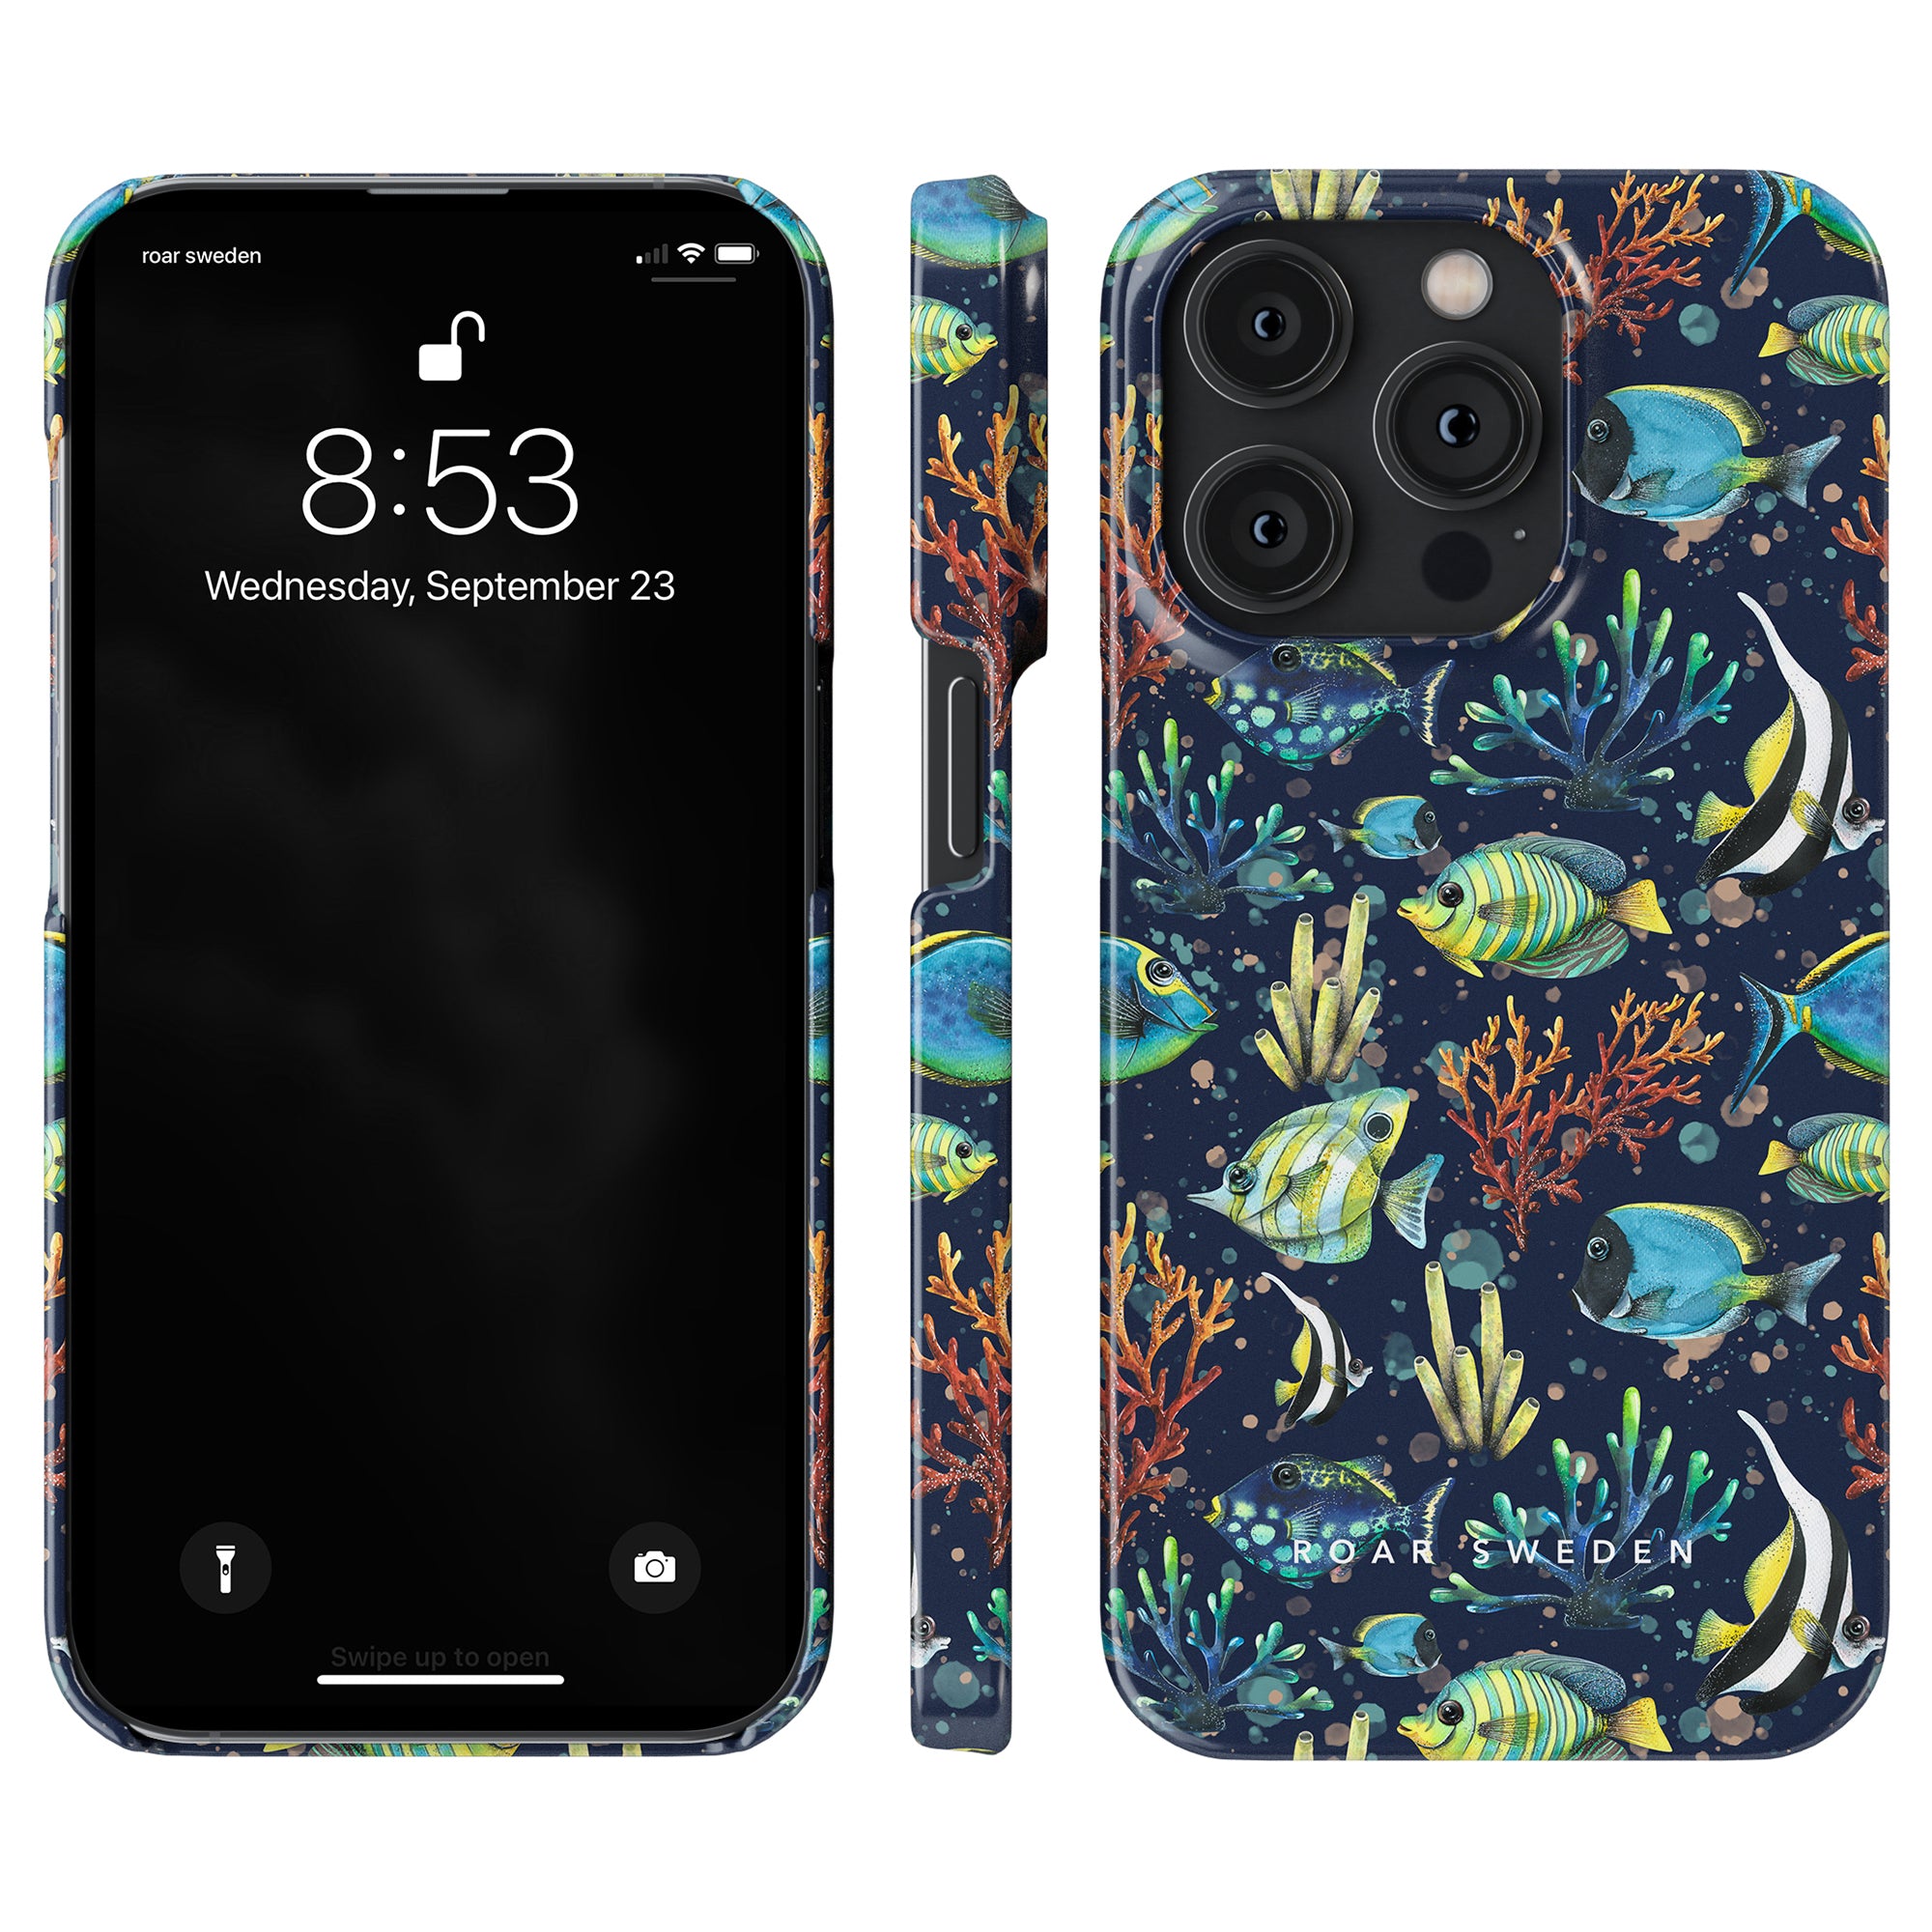 A Tropical Fish slim case featuring a vibrant tropical fish and coral pattern, perfect for those who love marine life.